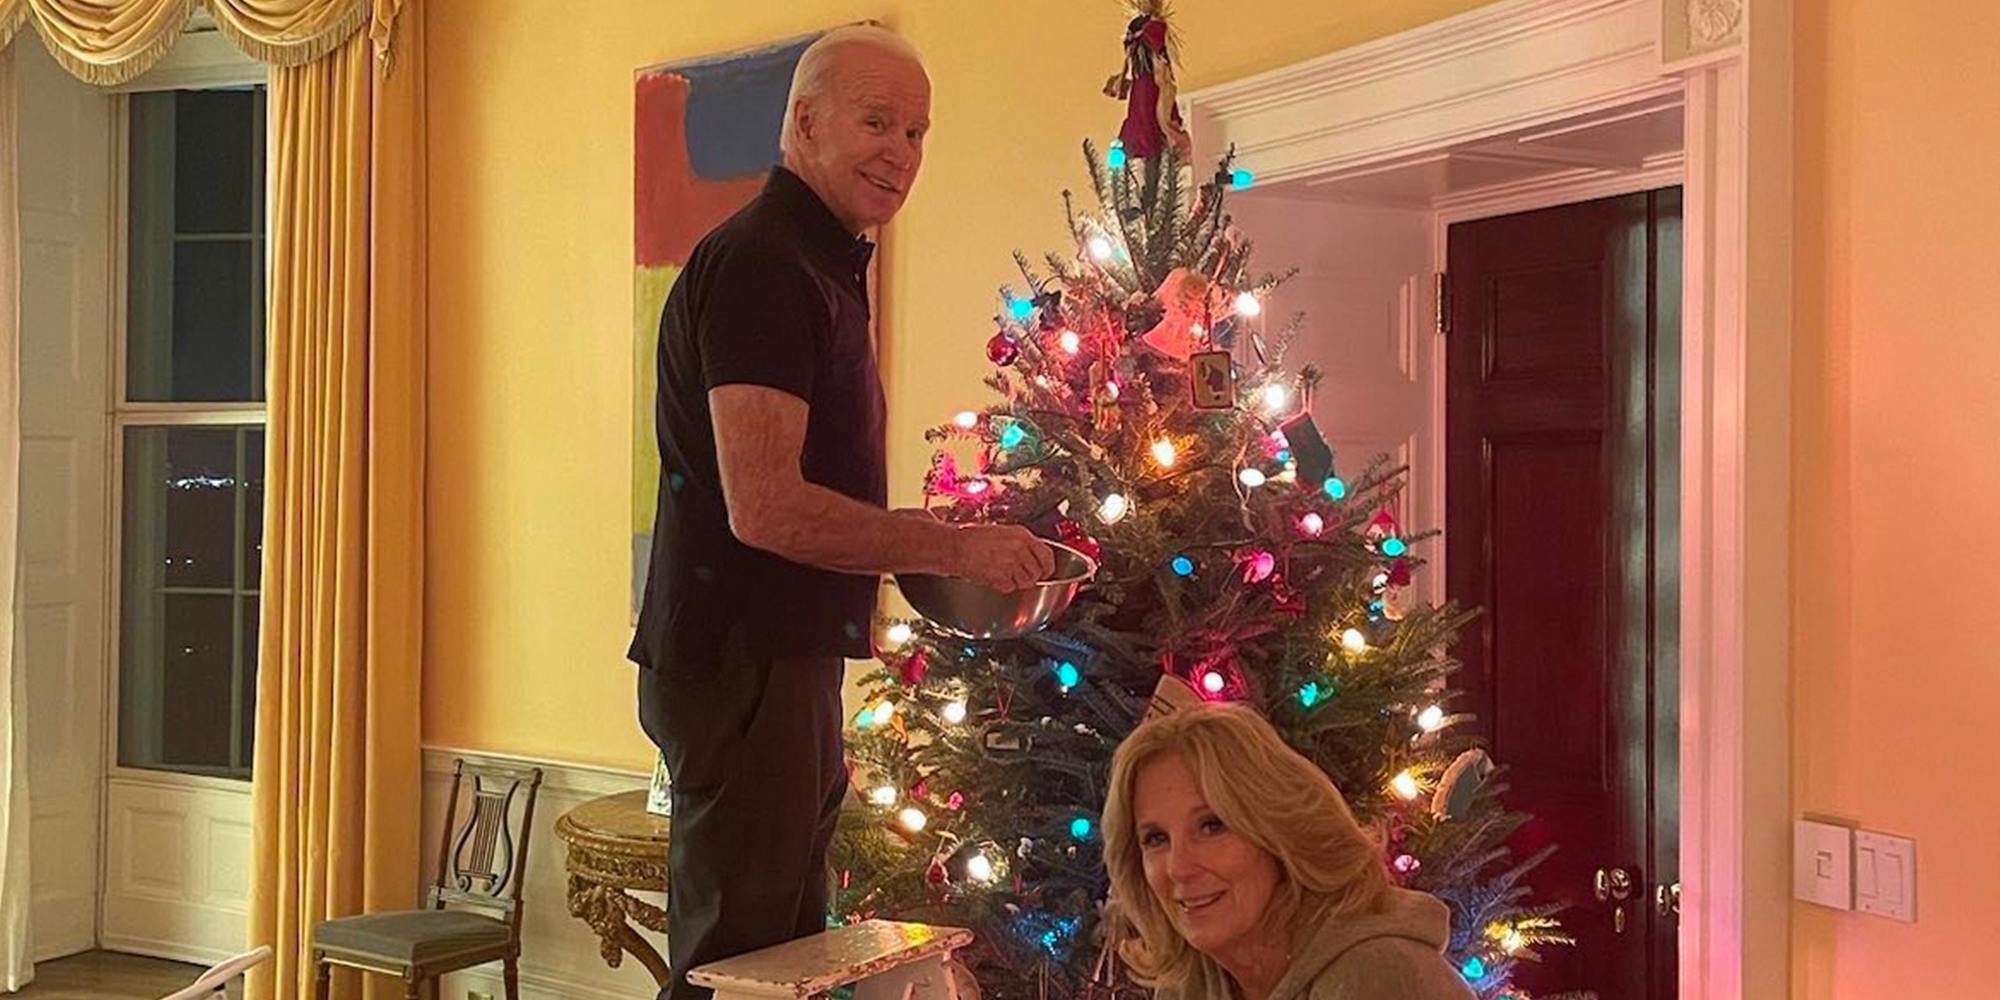 'That's not Joe Biden in 2023': Conservatives declare Christmas photo of Biden a fake—without realizing it's an old pic